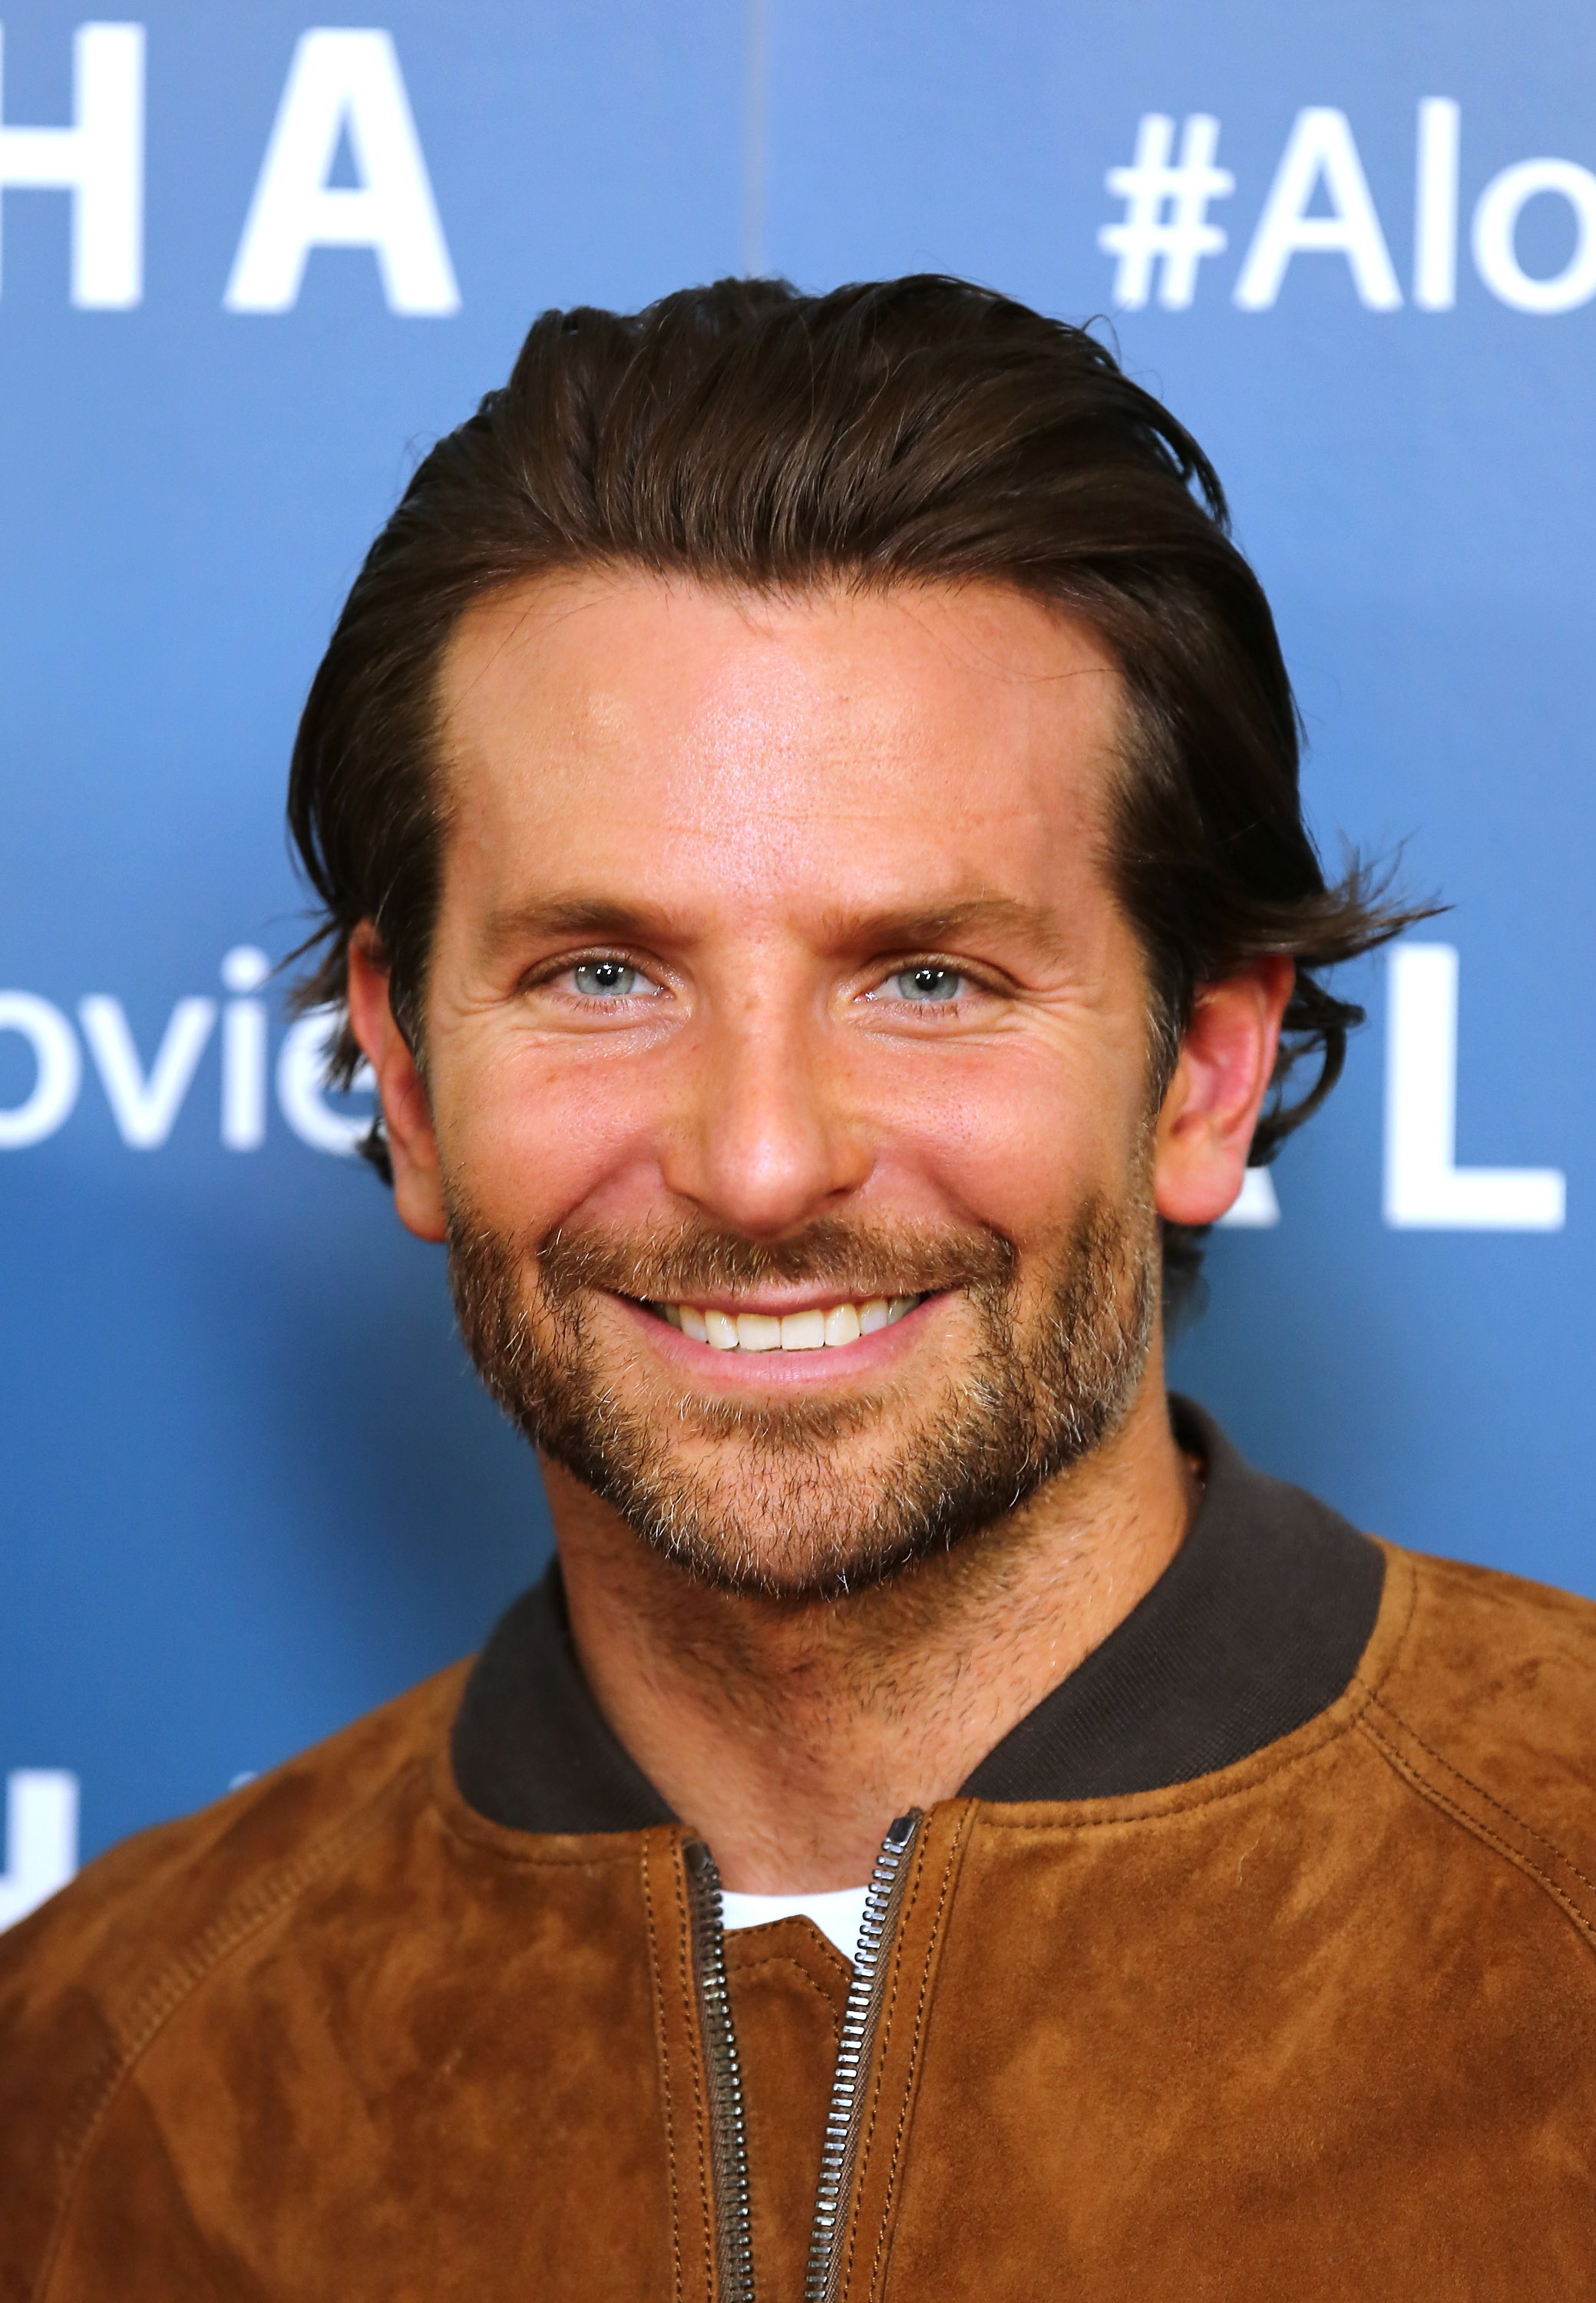 Bradley Cooper attends a VIP screening of 'Aloha' at Soho Hotel on May 16, 2015, in London, England. | Source: Getty Images